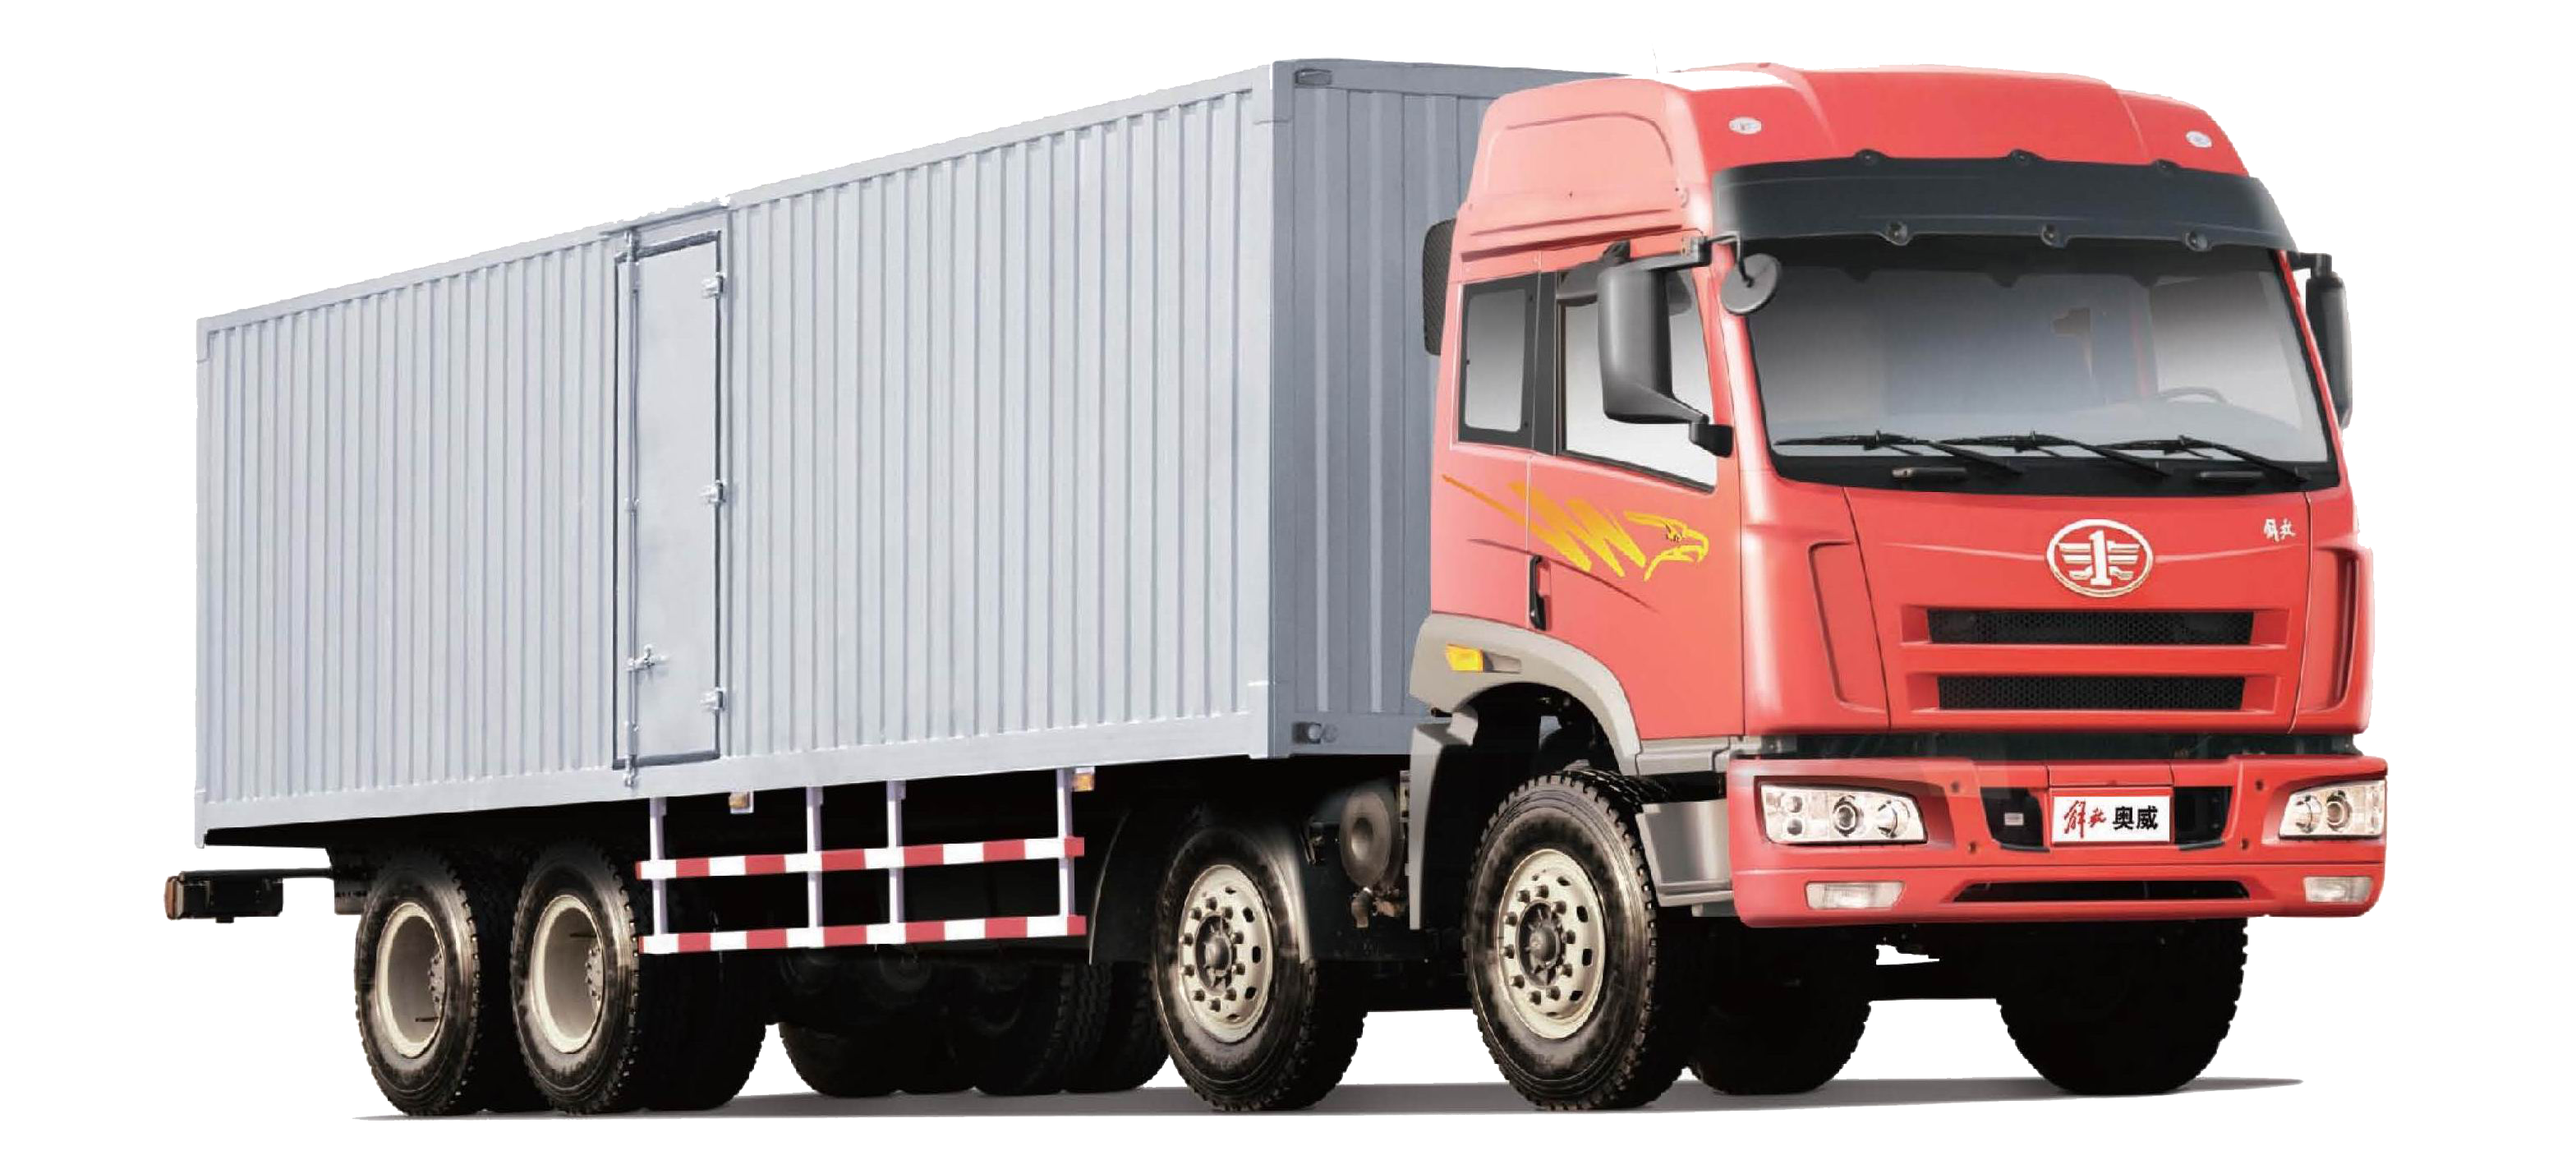 Lorry PNG HD Transparent Lorry HD.PNG Images.  PlusPNG